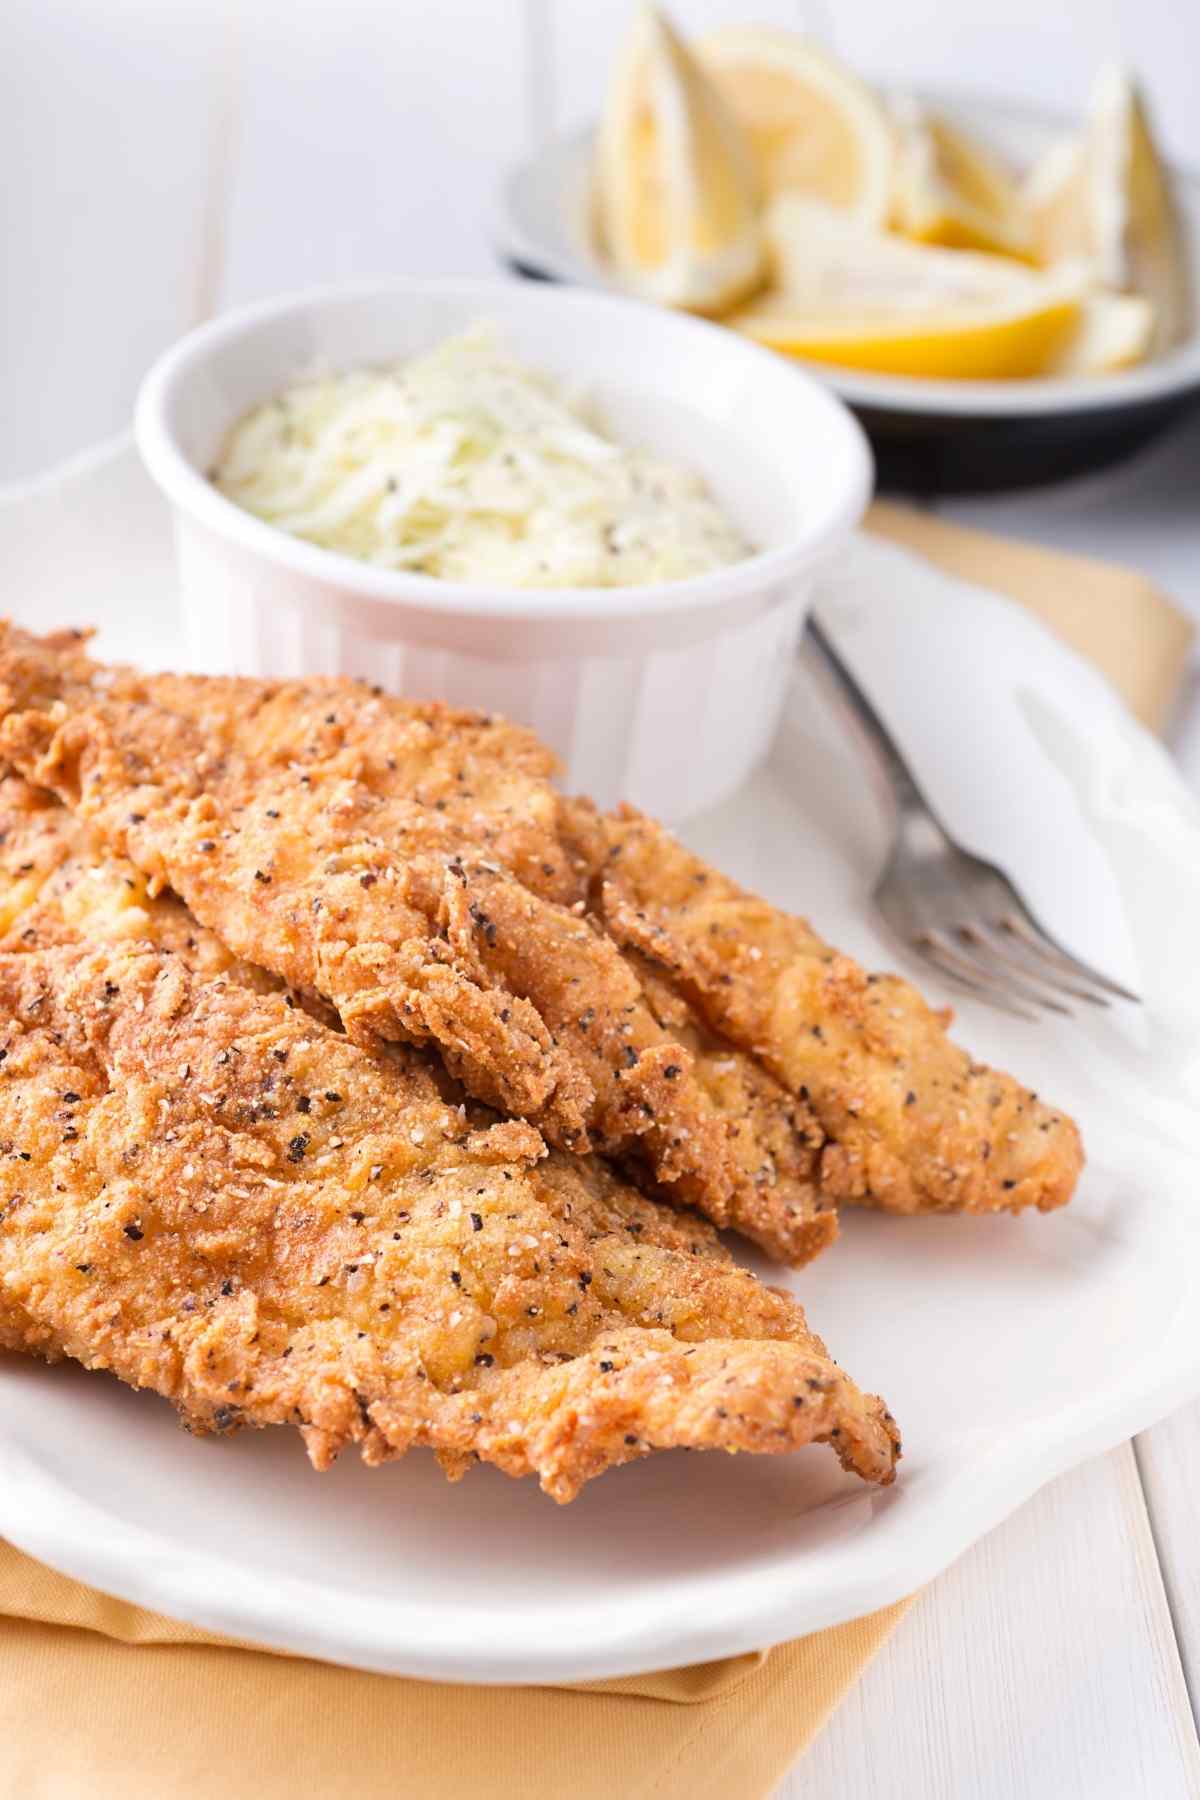 We’re sharing 11 of the Best Catfish Recipes for you to try. All of them are easy to make and cook up quick enough to serve on busy weeknights.